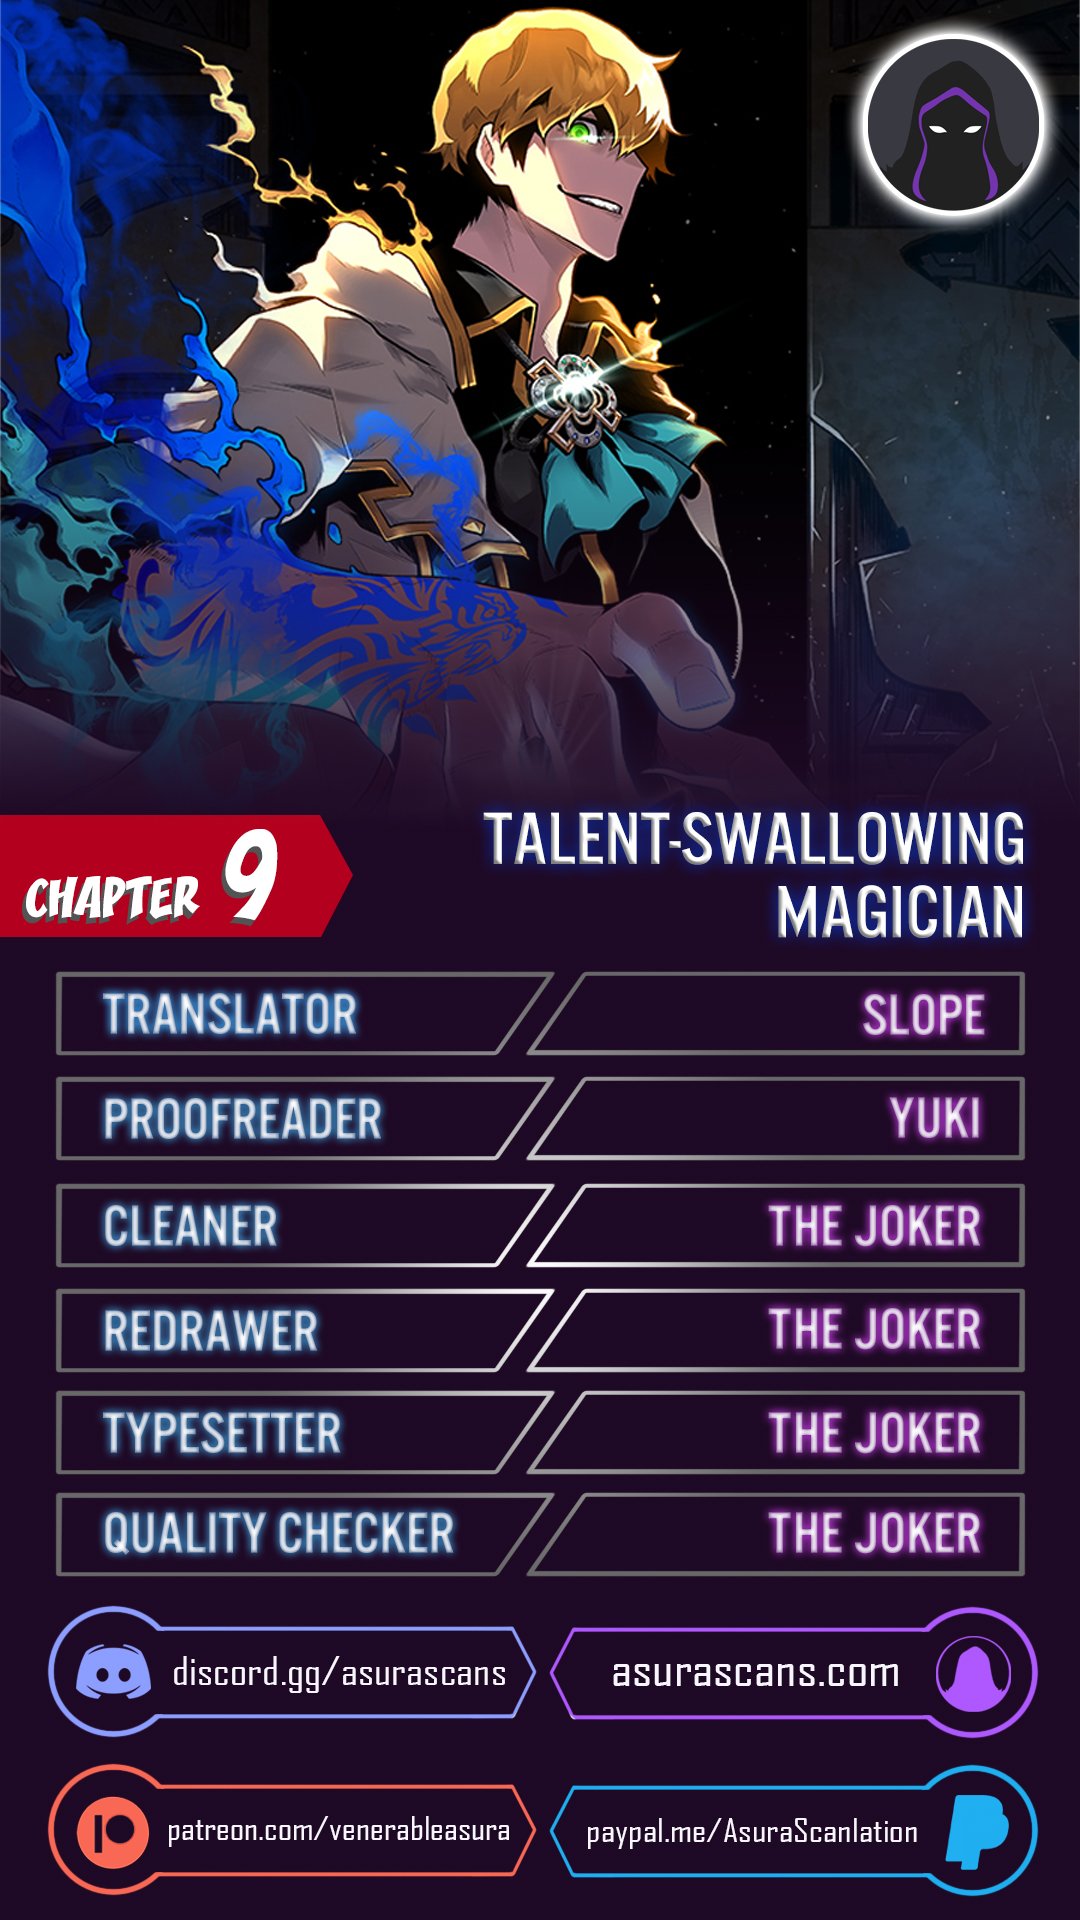 Talent-Swallowing Magician - Chapter 15407 - Image 1